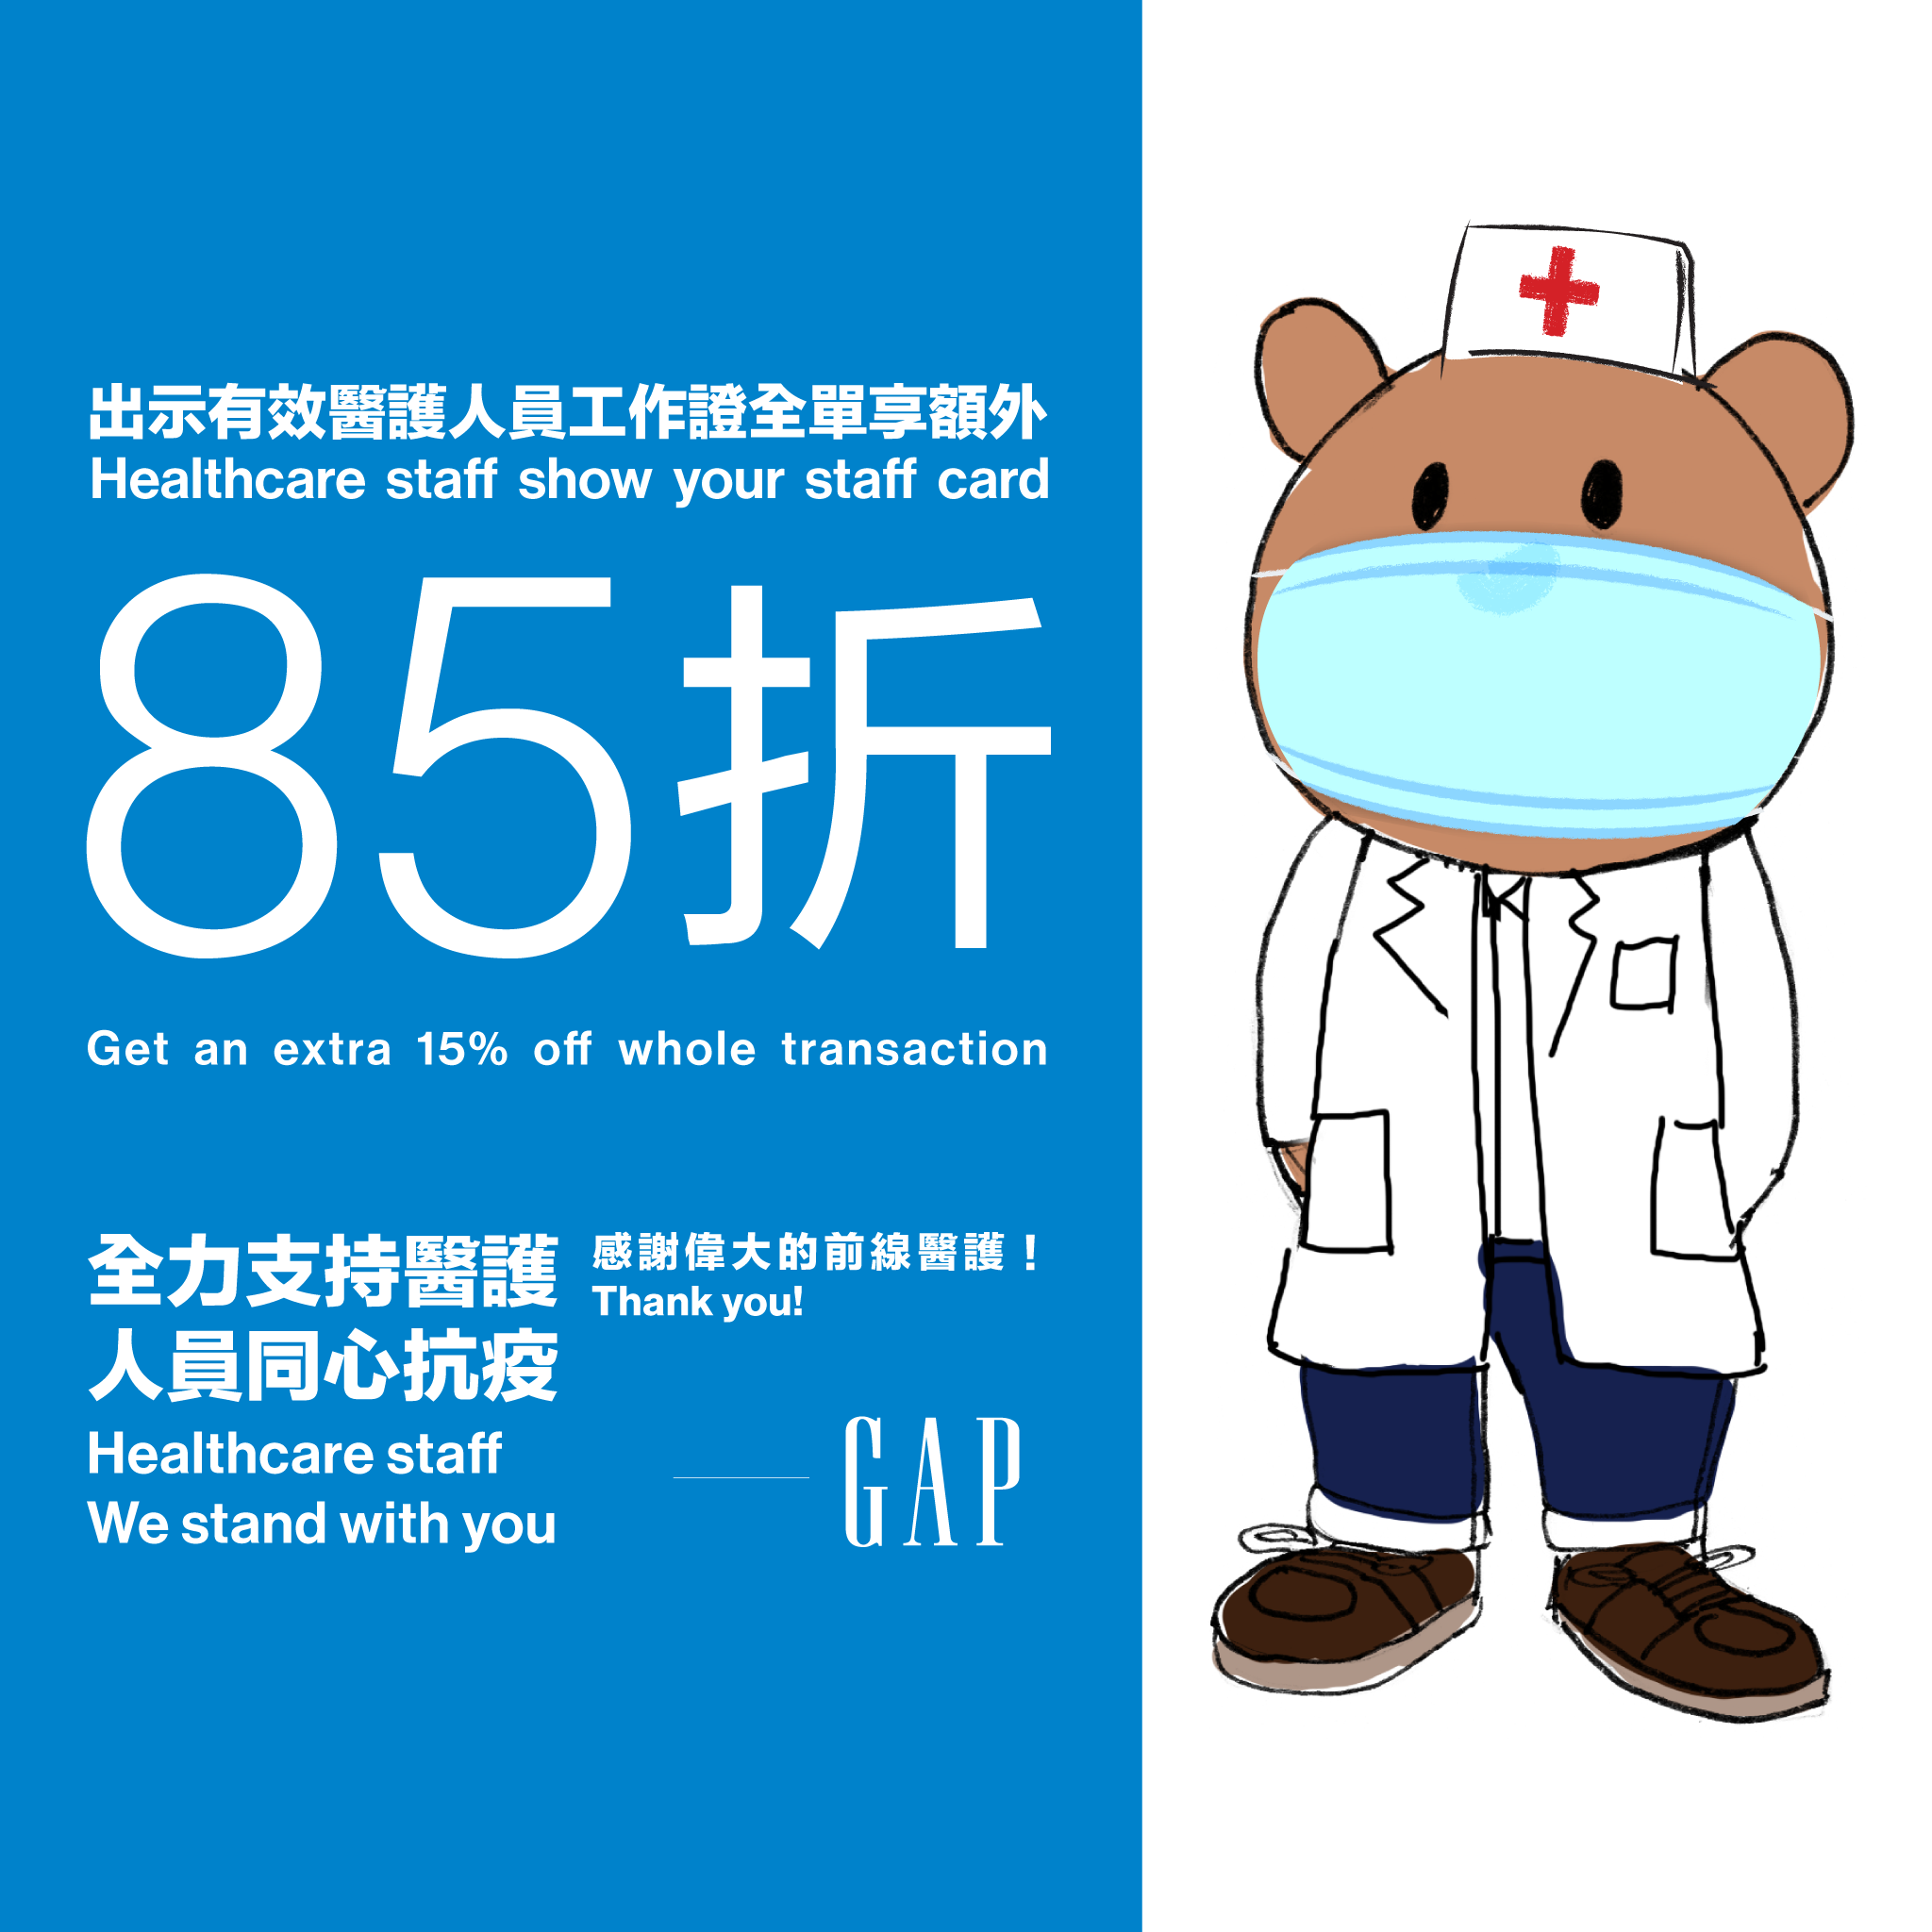 【Here’s to Our Healthcare Heroes | 向醫護人員致敬】